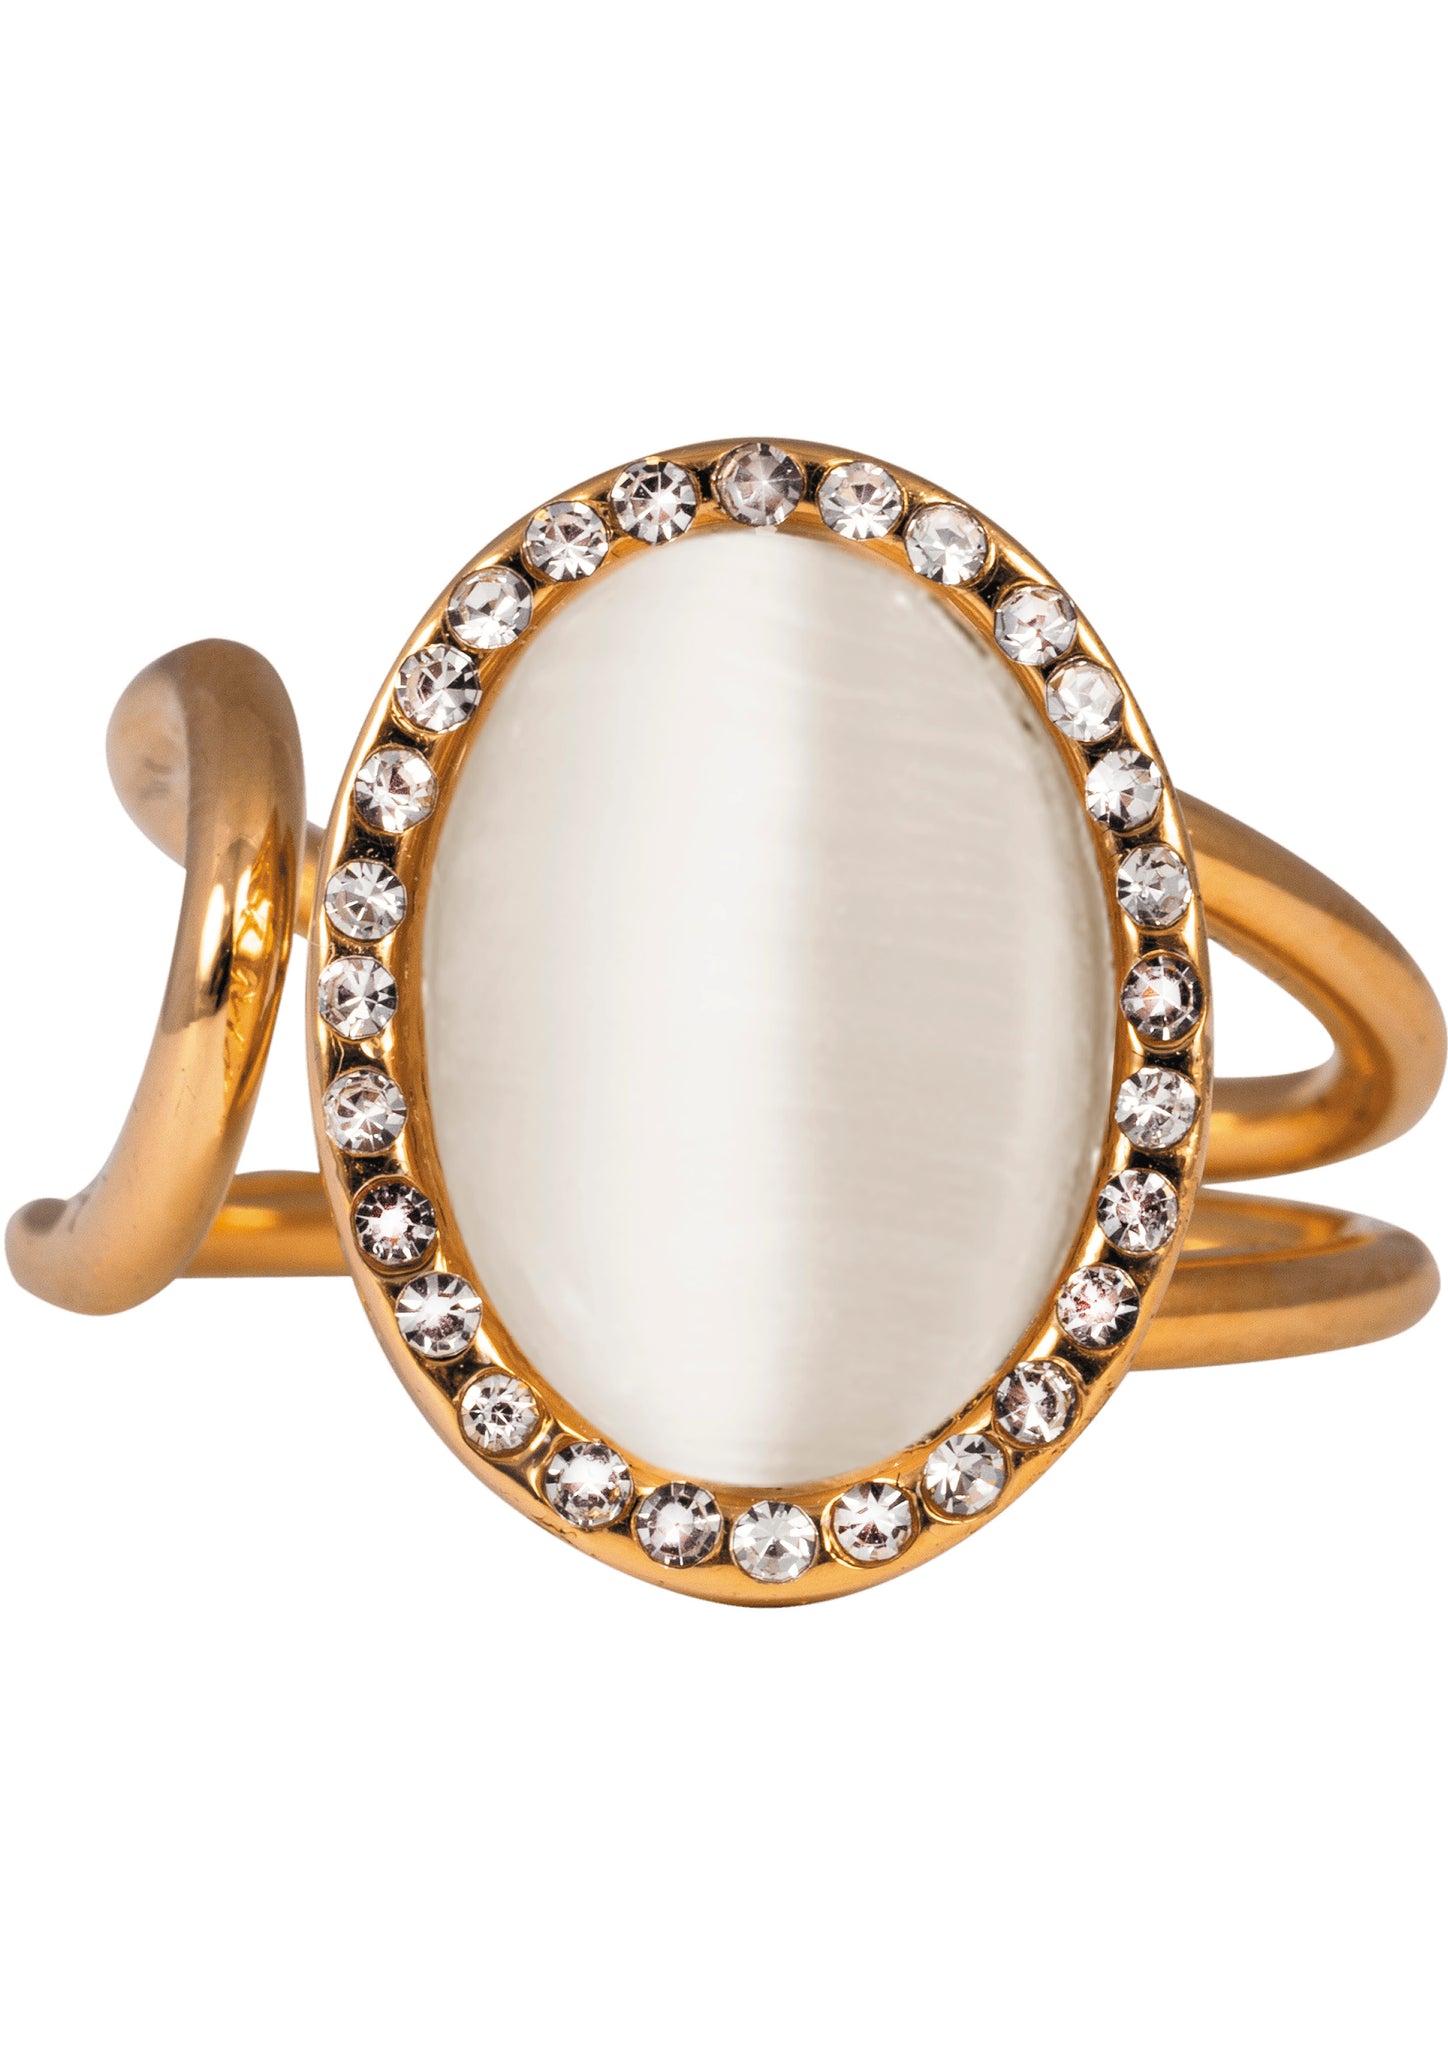 IOAKU Elipse Sparkle Gold Ring - Your Style Your Story